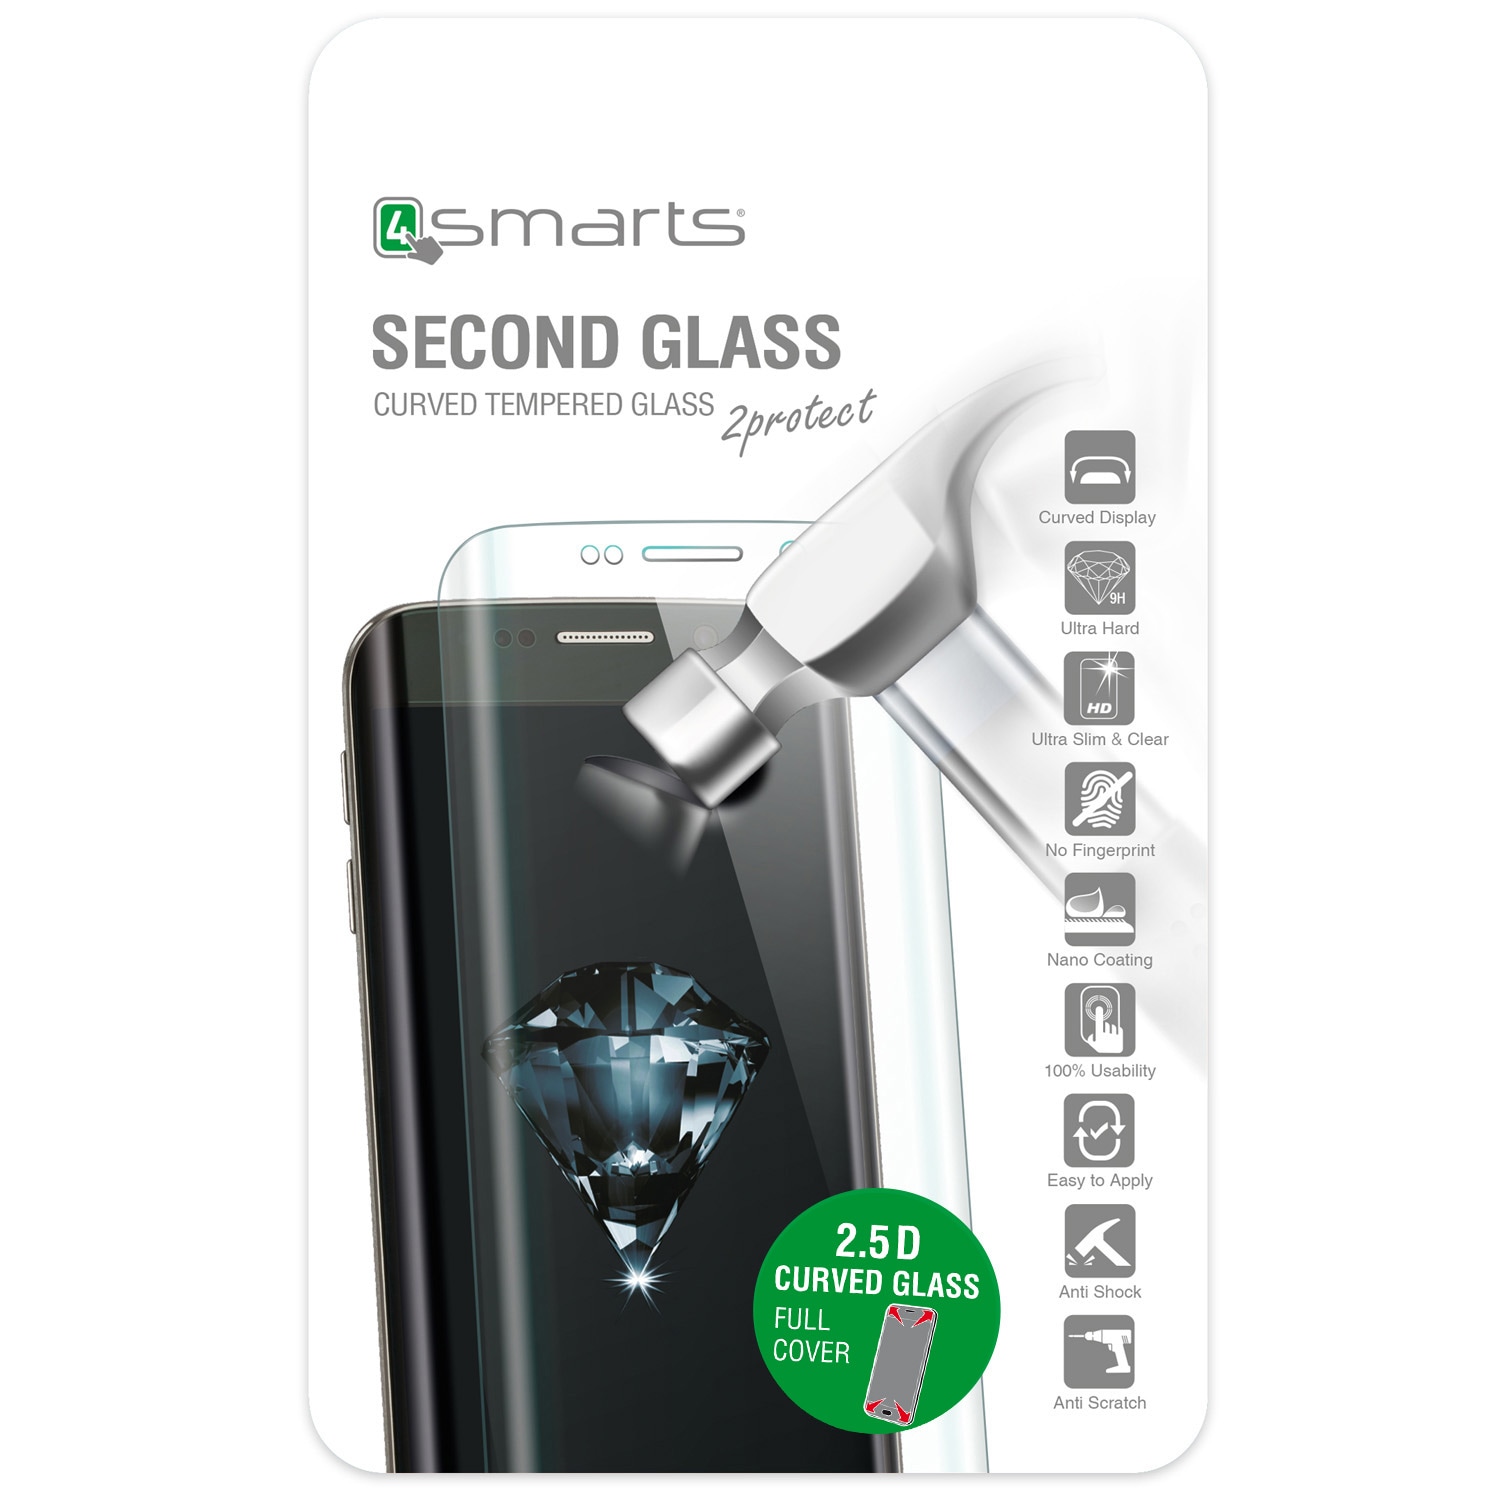 4smarts Second Glass Curved 2.5D iPhone 6/6s Plus - Valkoinen